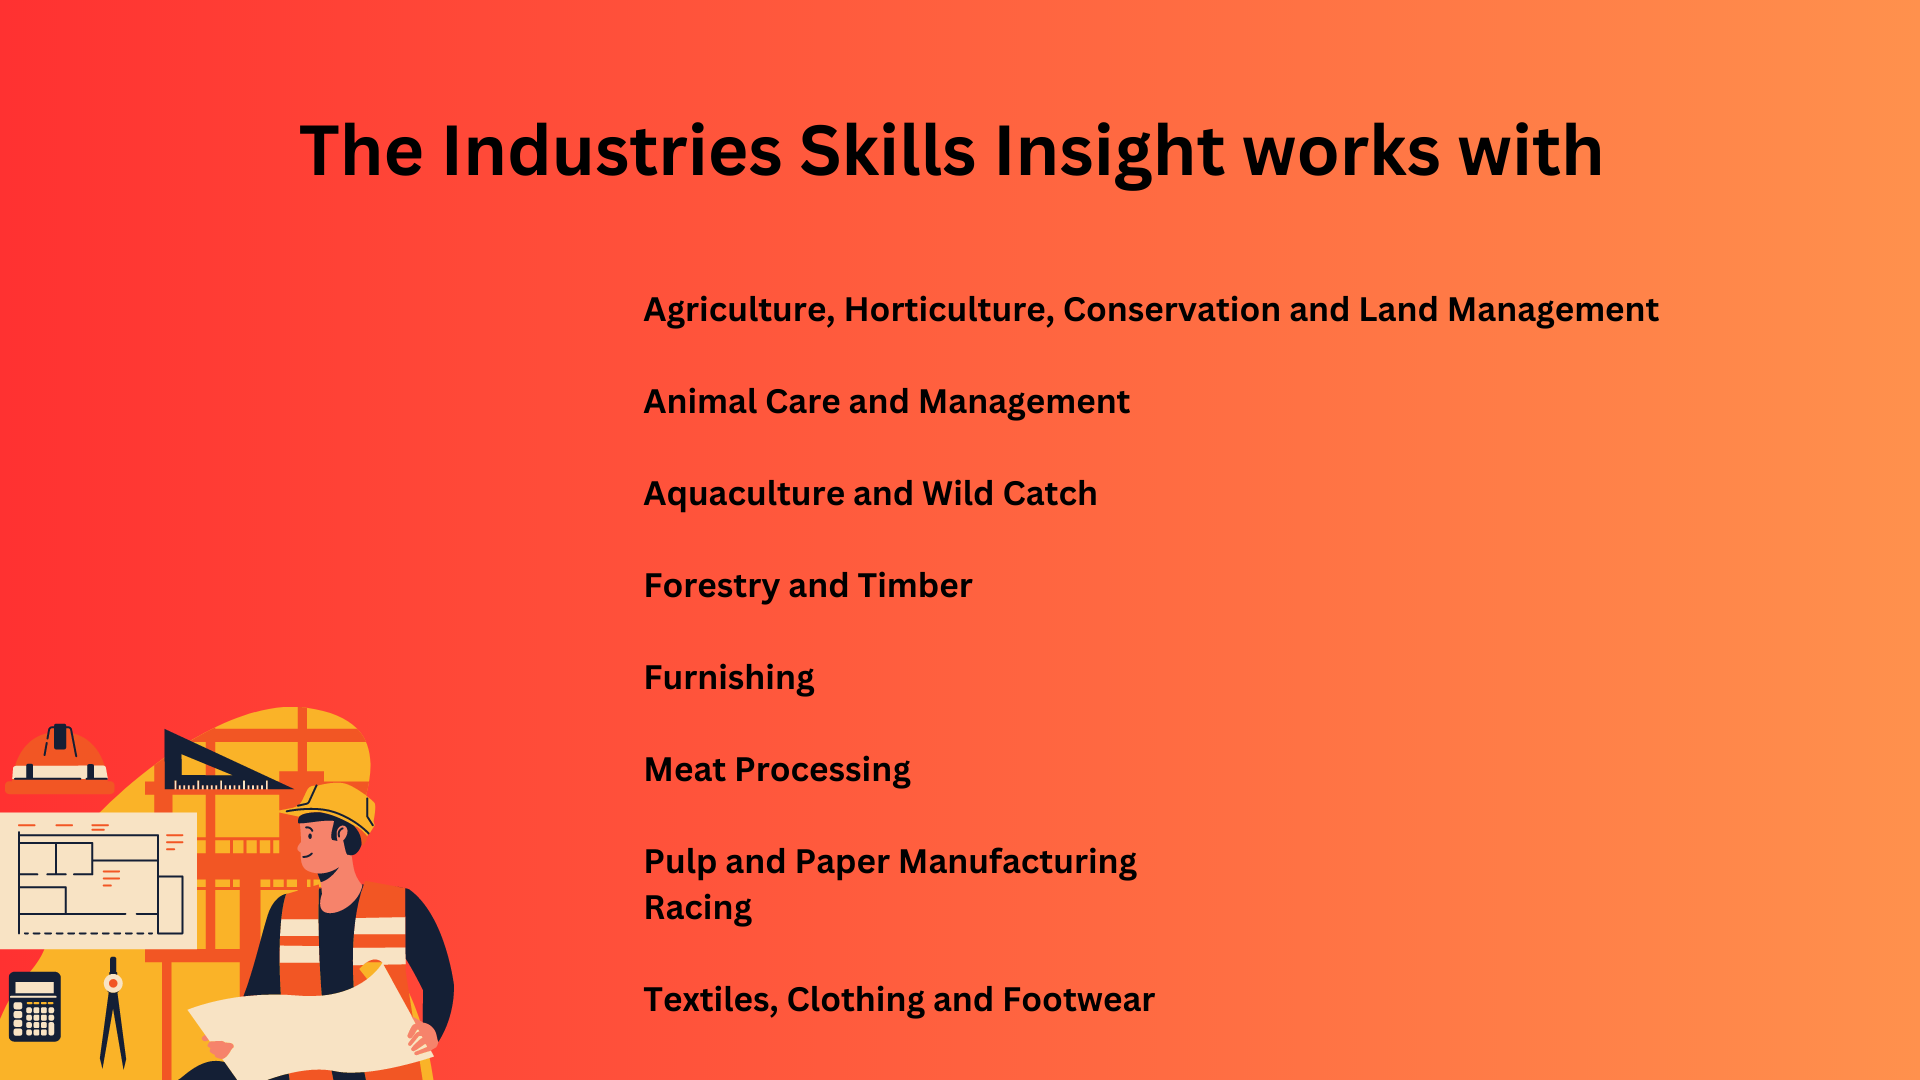 The Industries Skills Insight works